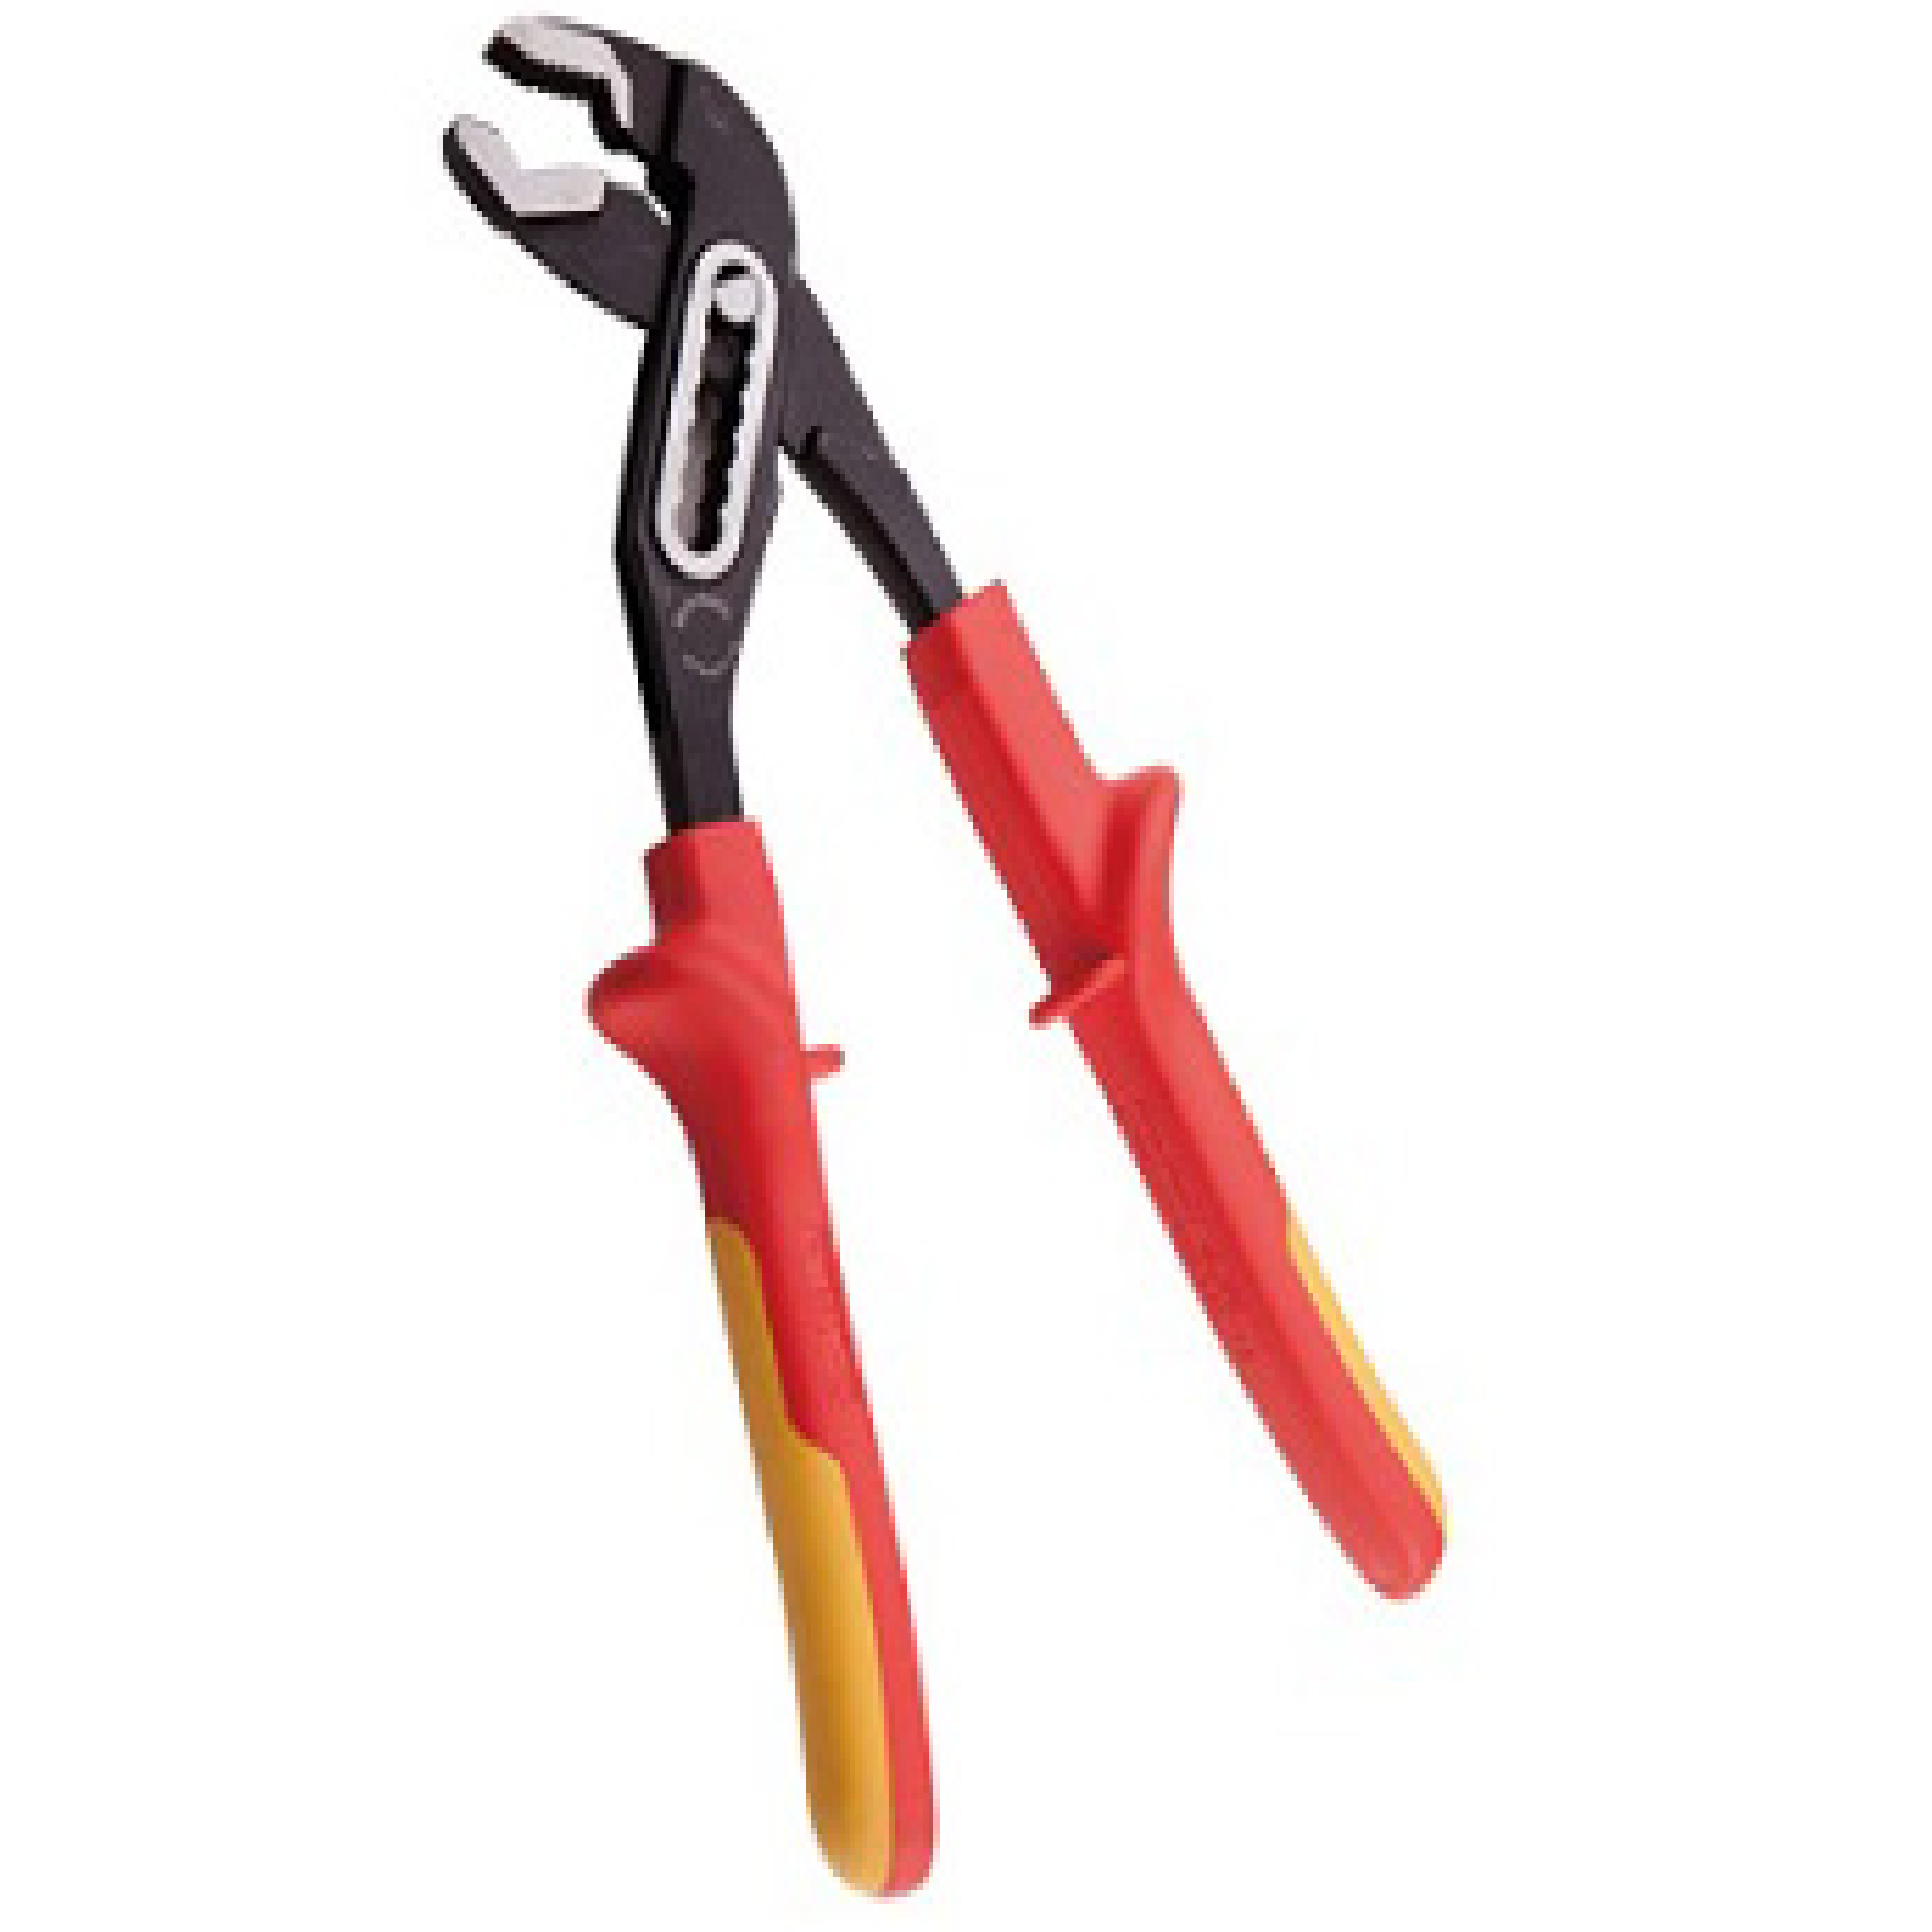 BluePoint 10"/250MM VDE Slip Joint Pliers WT8627-10